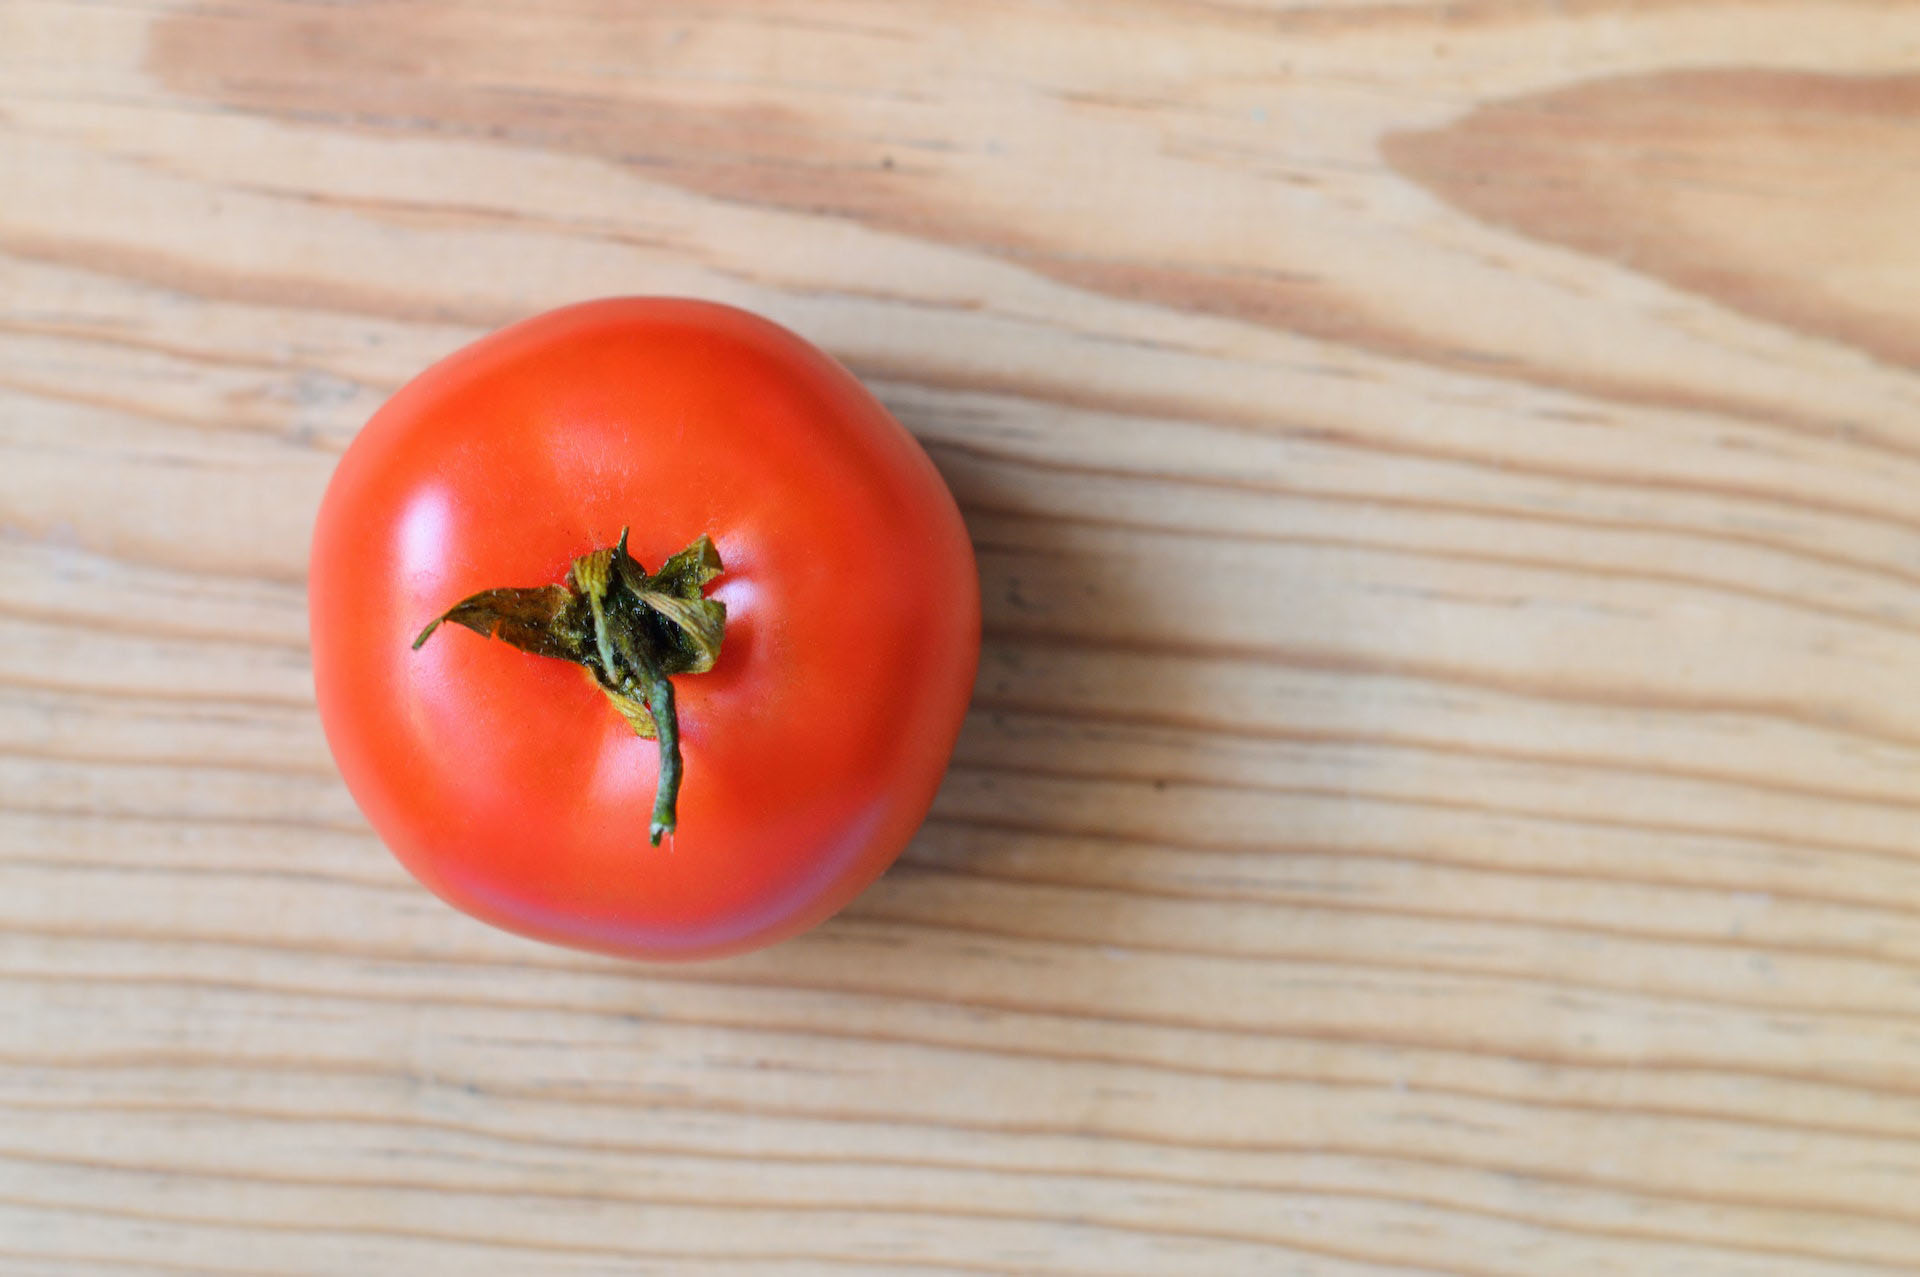 Image of tomato on wooden surface.